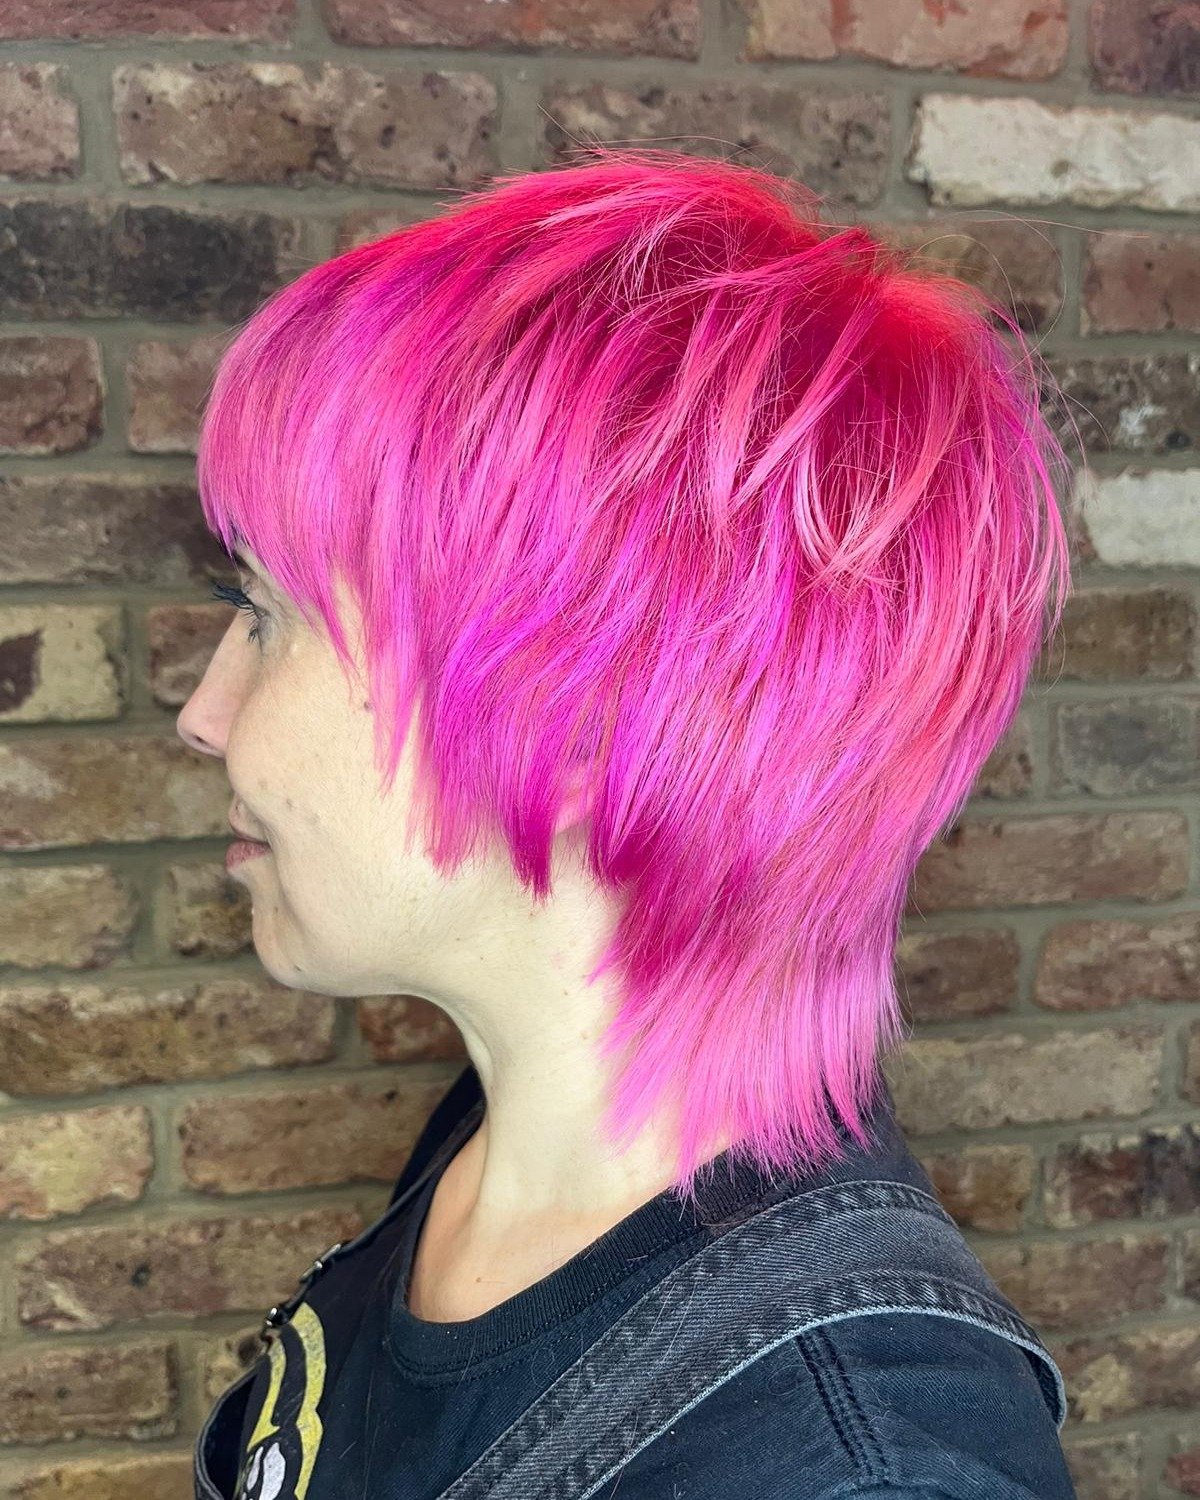 May your day be as bright as your hair 💖🌸🎀💘🍬

📸 by @hairbyleahoxo

.
.
.

#worthing #westsussex #sussex #worthingsalon #love #hair #hairinspo #pink #pinkhair #pinkhairdontcare #shorthair #hairstyle